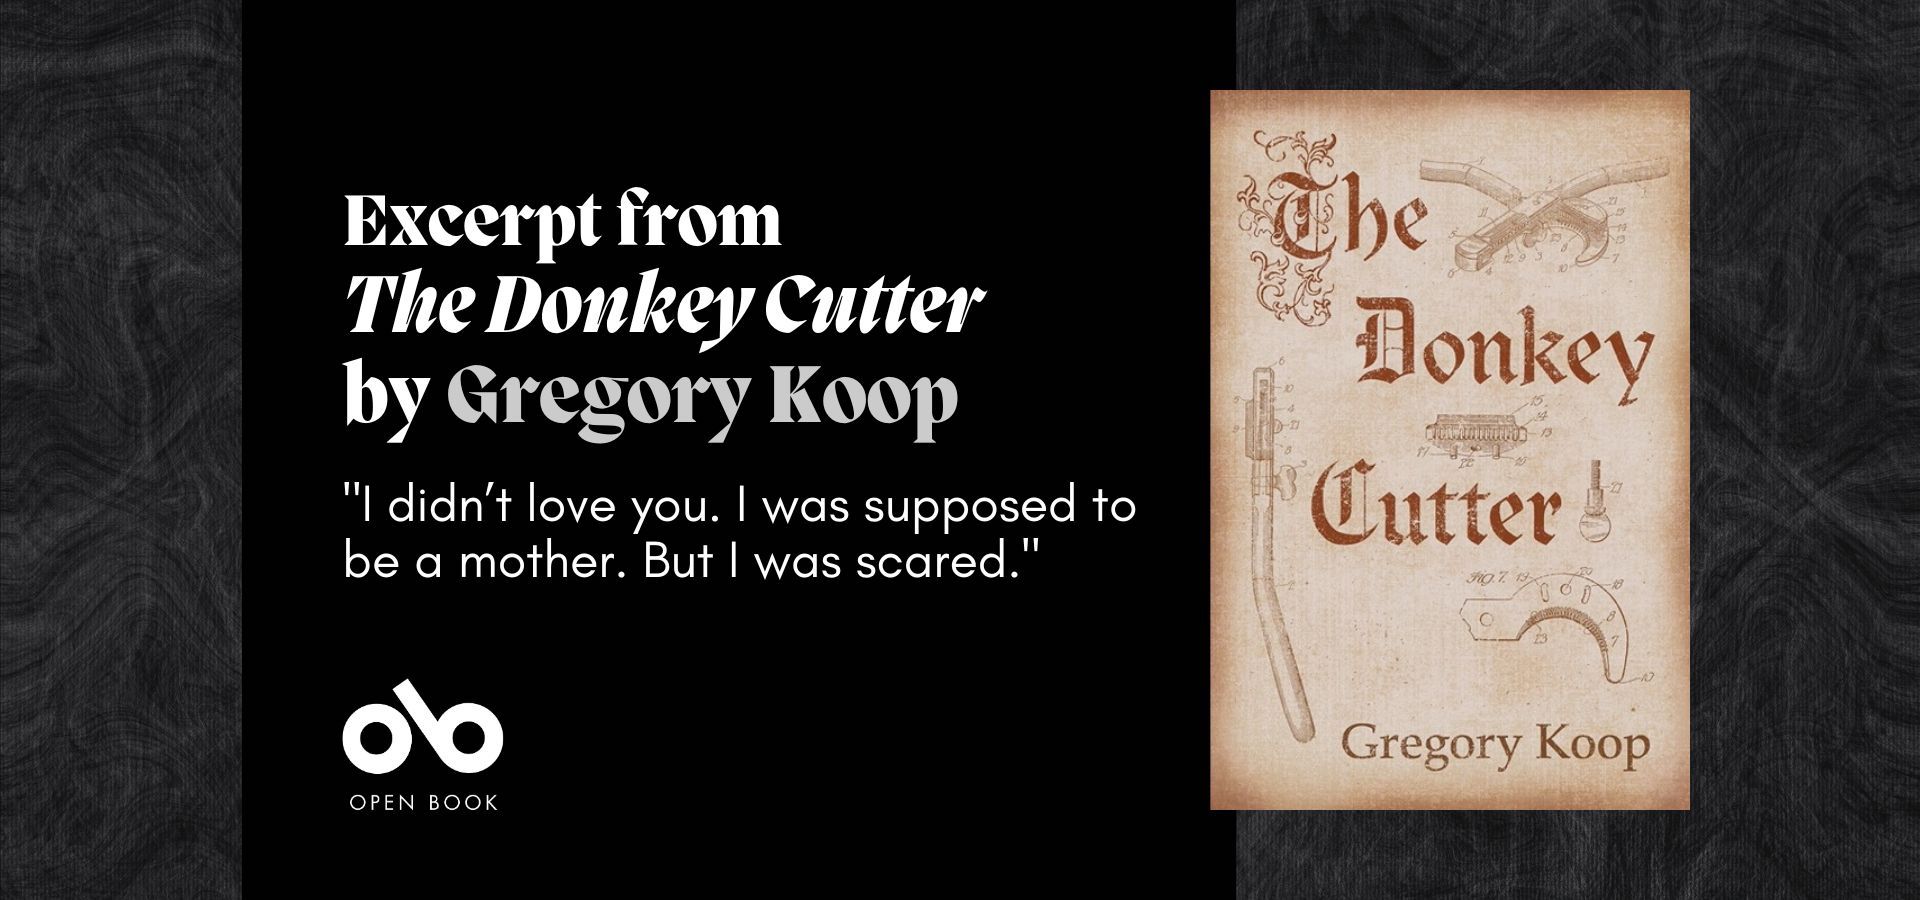 Black banner image with the cover from Gregory Koop's the Donkey Cutter and text reading "Excerpt from The Donkey Cutter by Gregory Koop. "I didn’t love you. I was supposed to be a mother. But I was scared.""